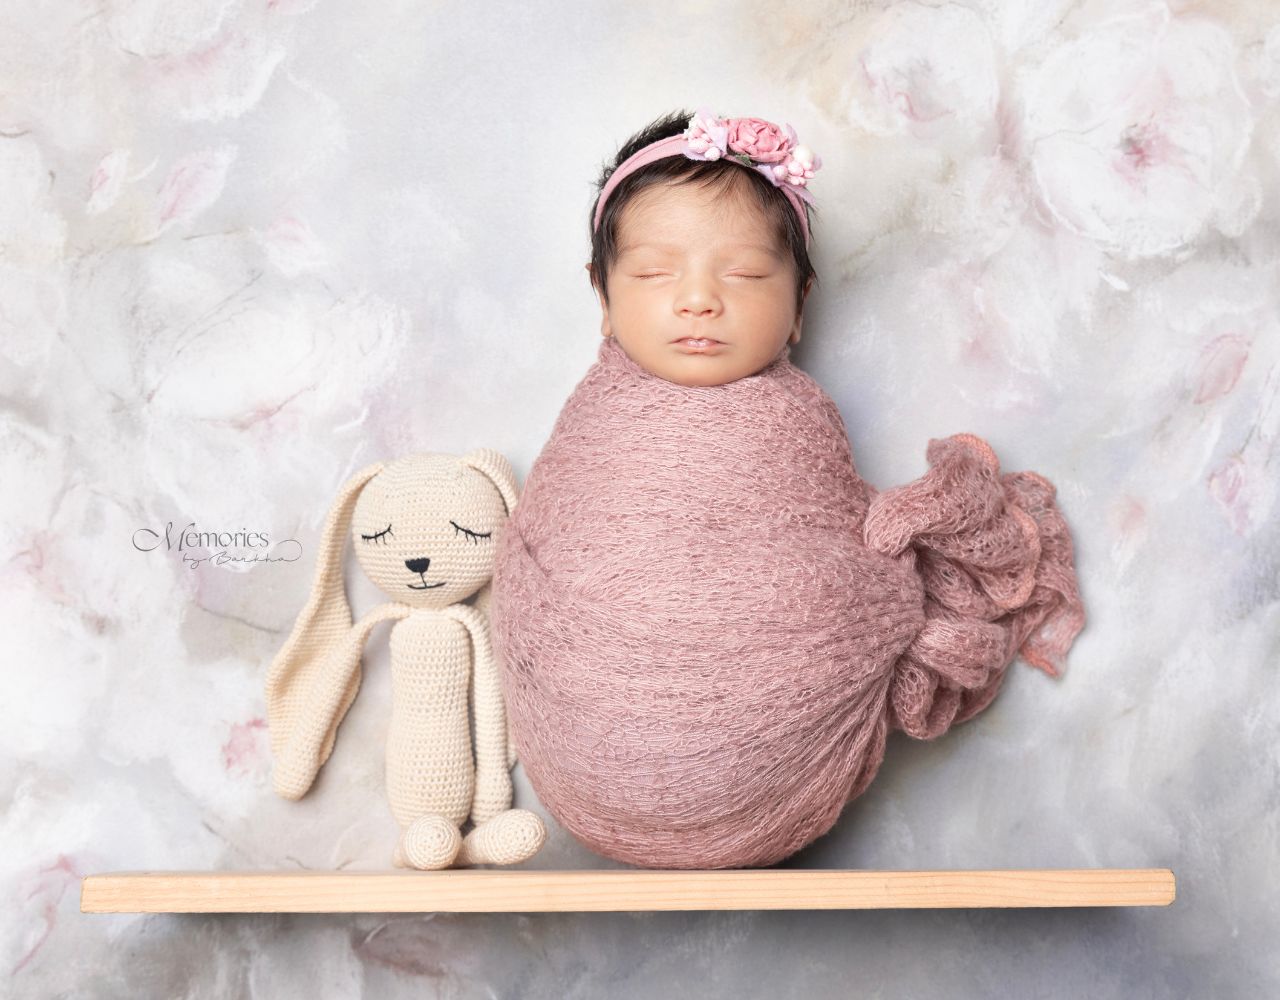 Sweet and Simple: Classic Newborn Poses